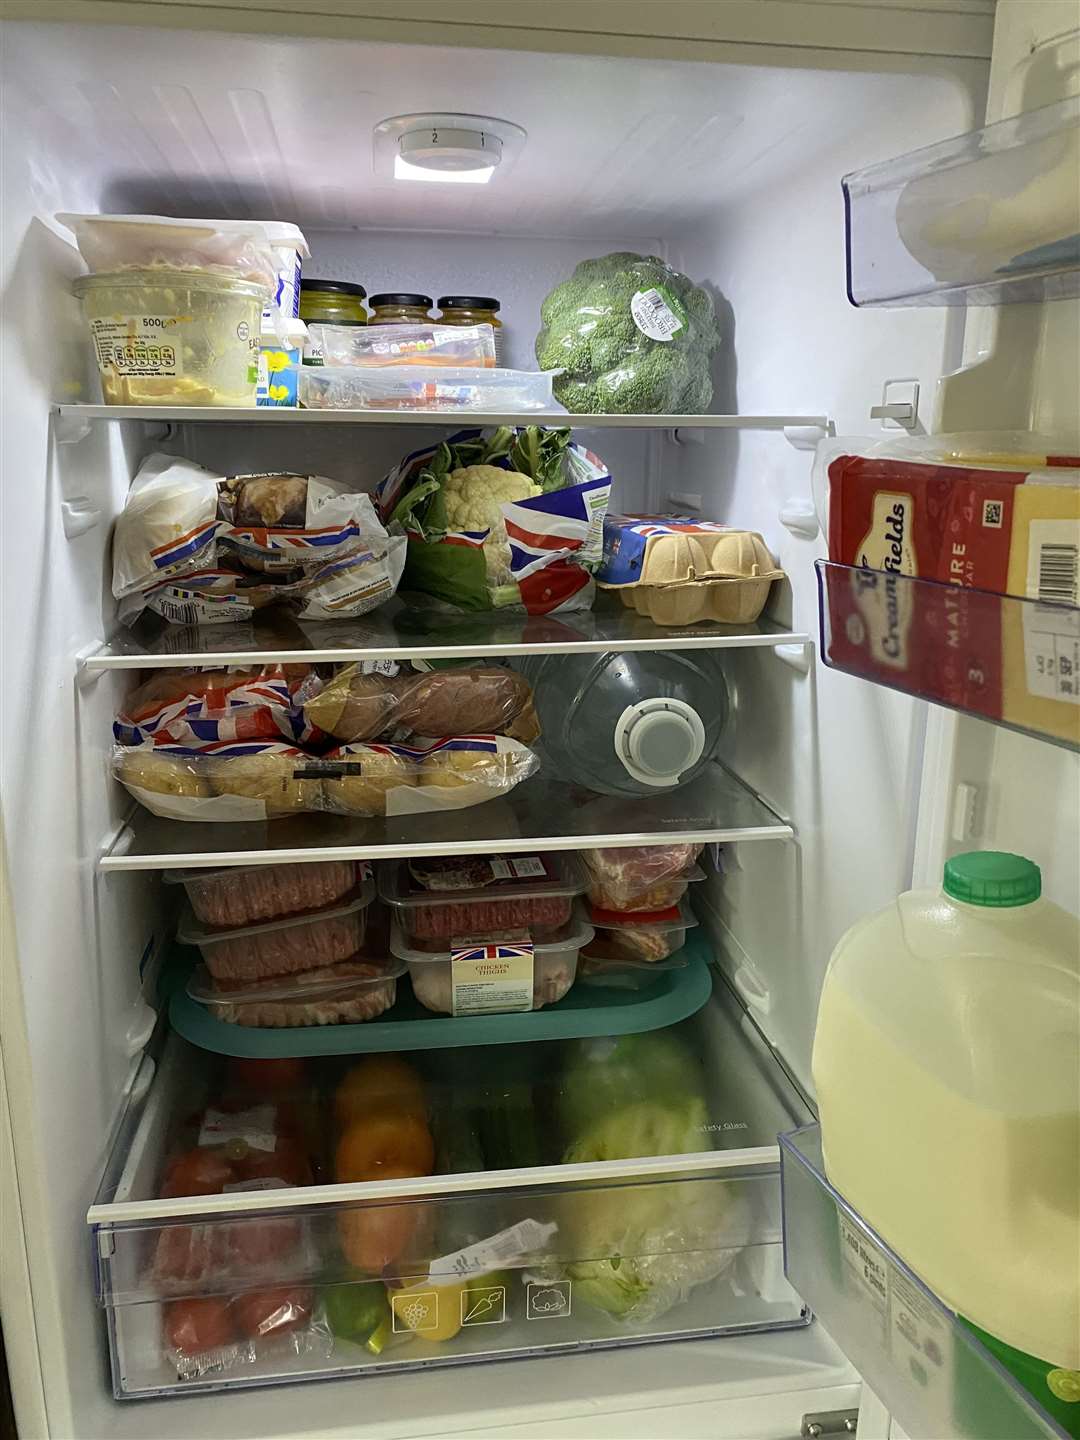 Our fridge looked healthy and full even on our tight budget